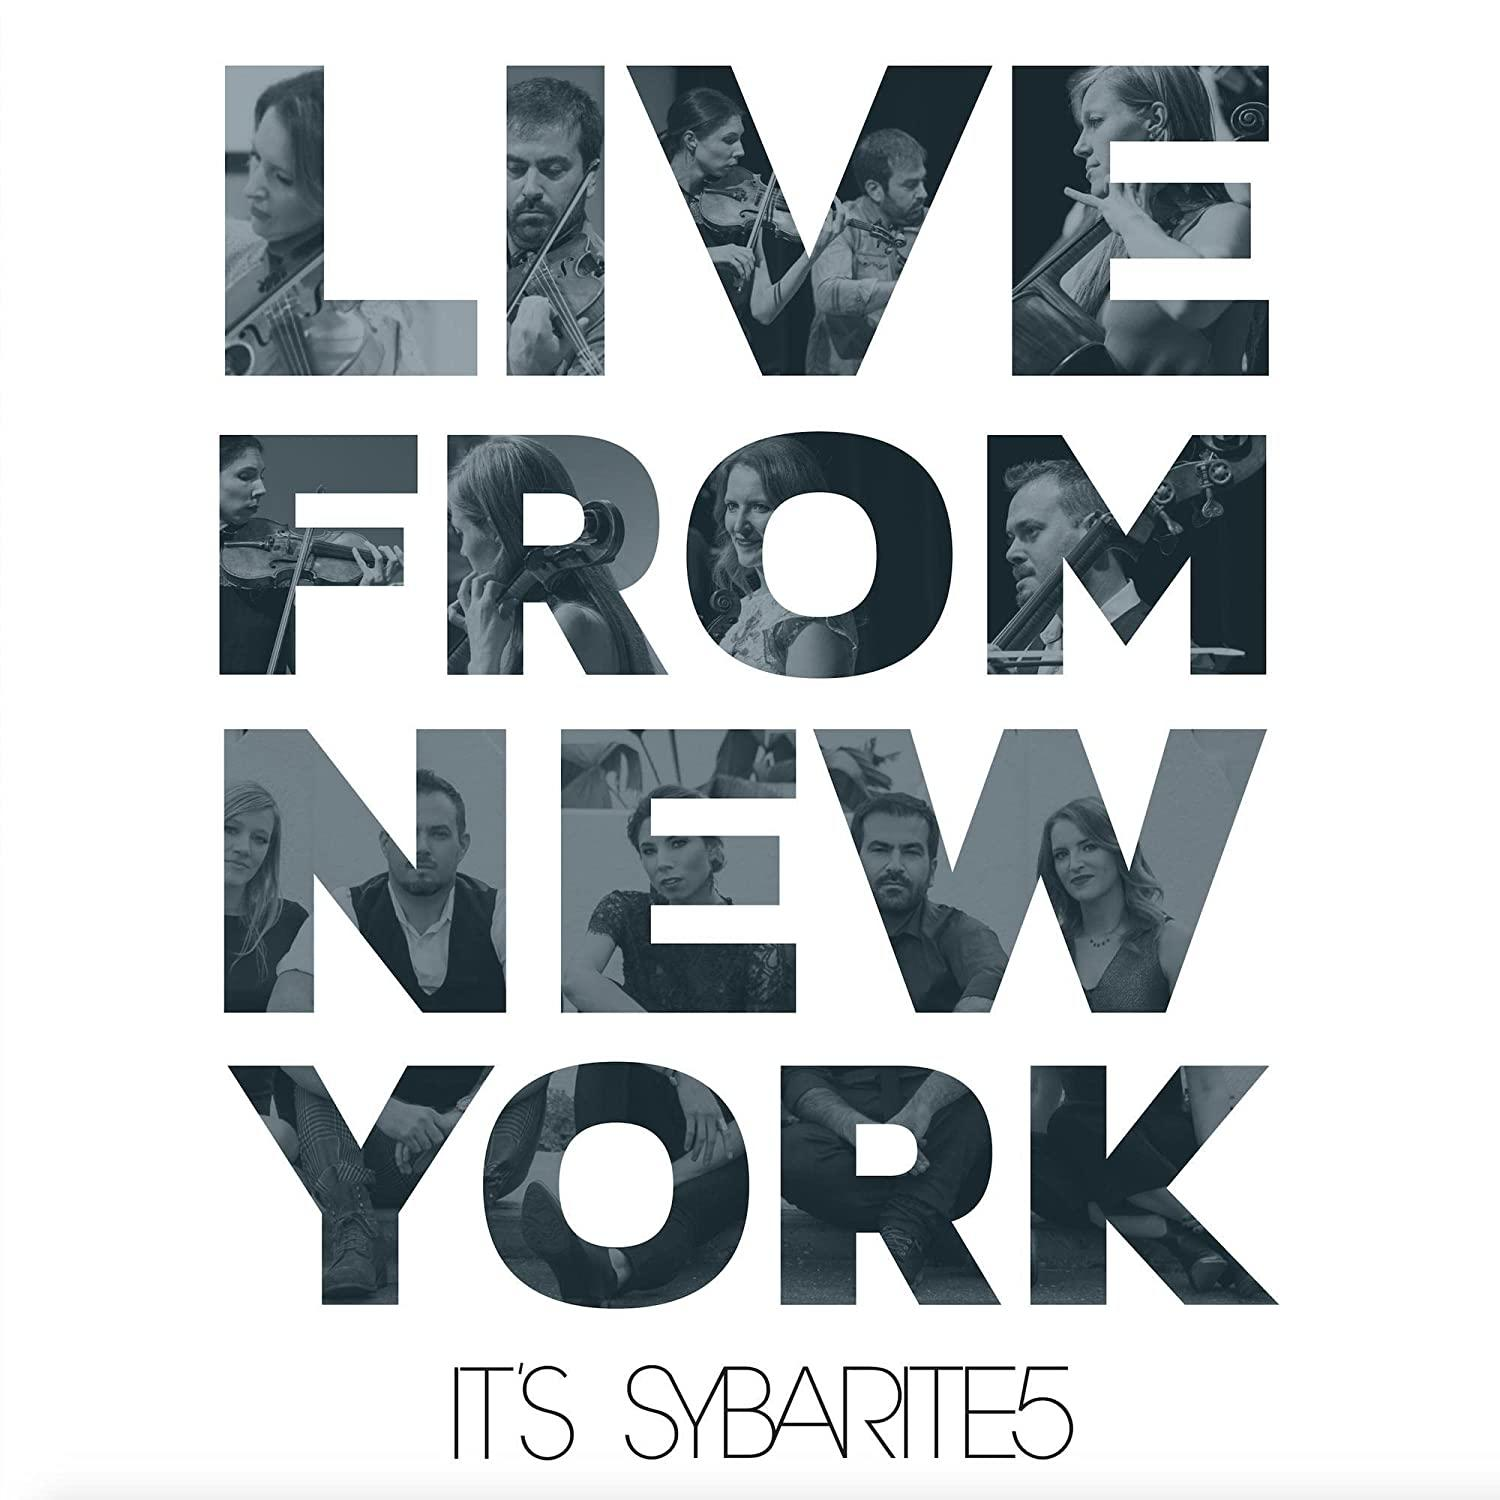 Sybarite5 - Live It\'s (CD) Sybarite5 - York, From New